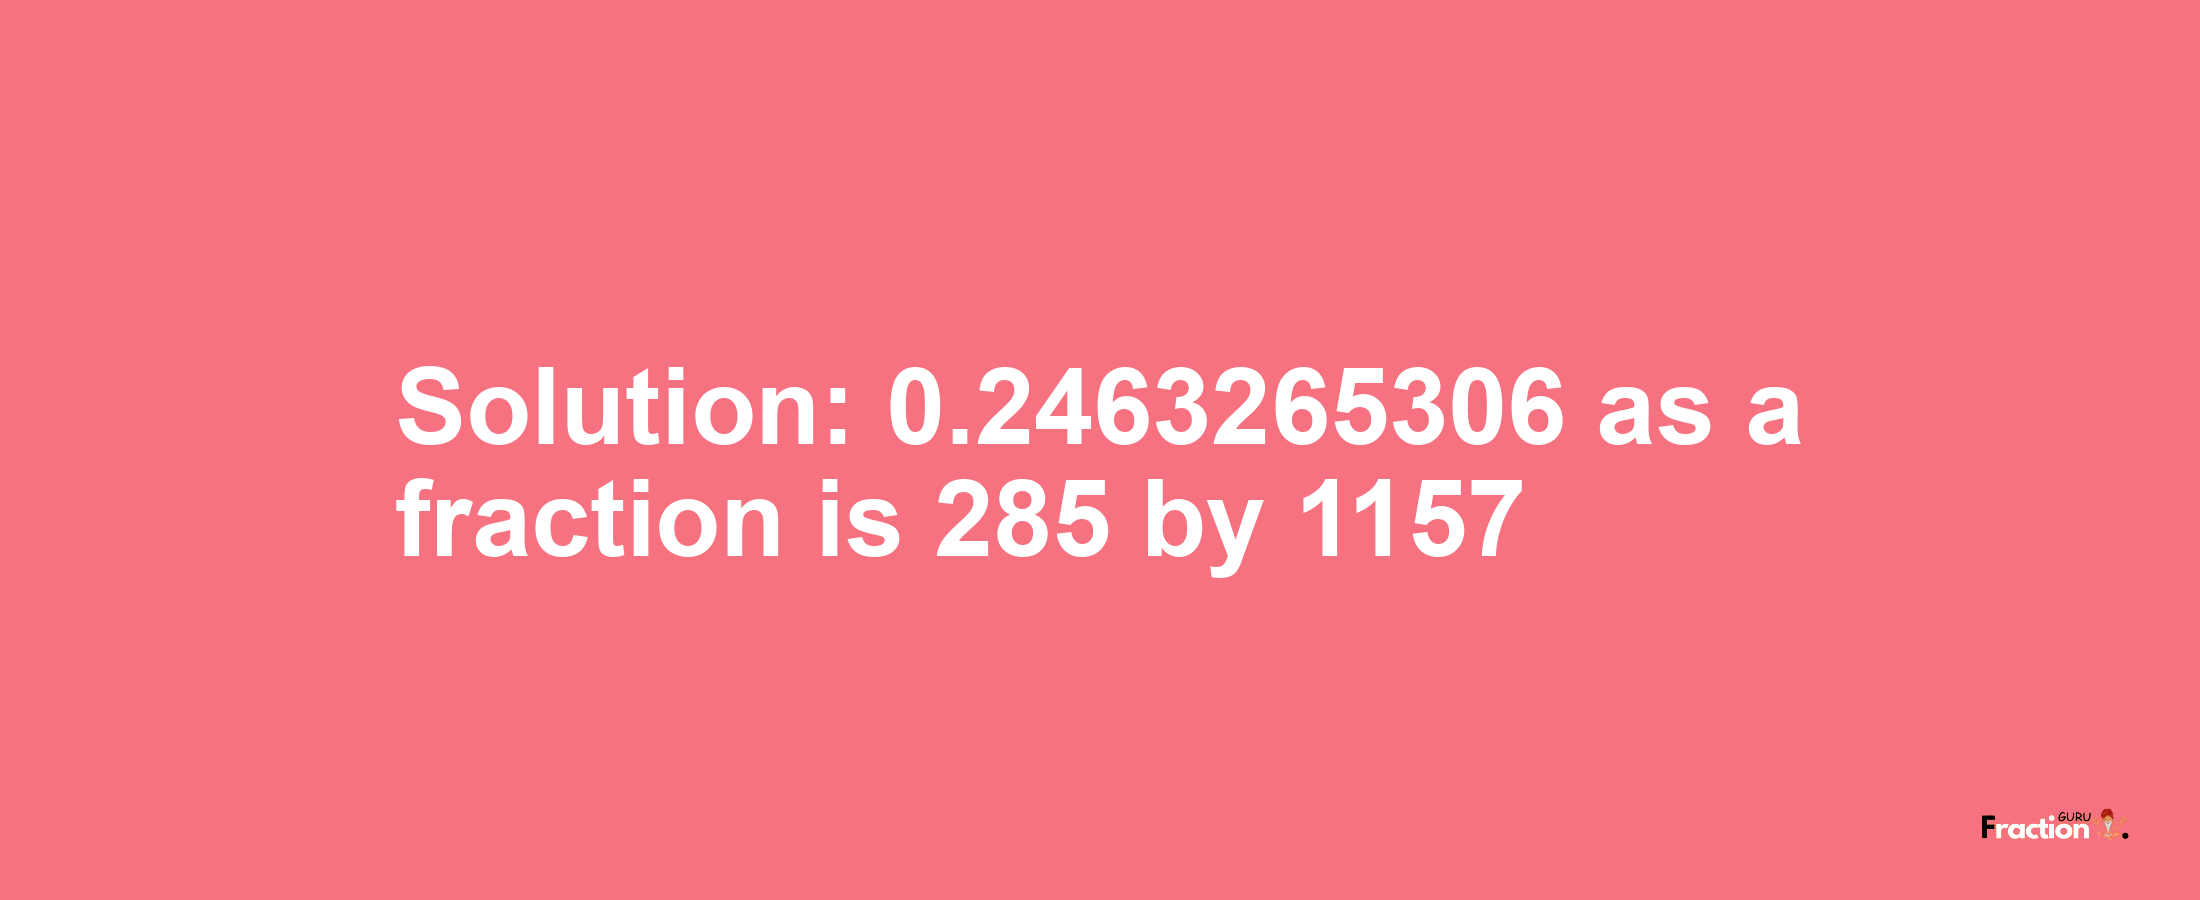 Solution:0.2463265306 as a fraction is 285/1157